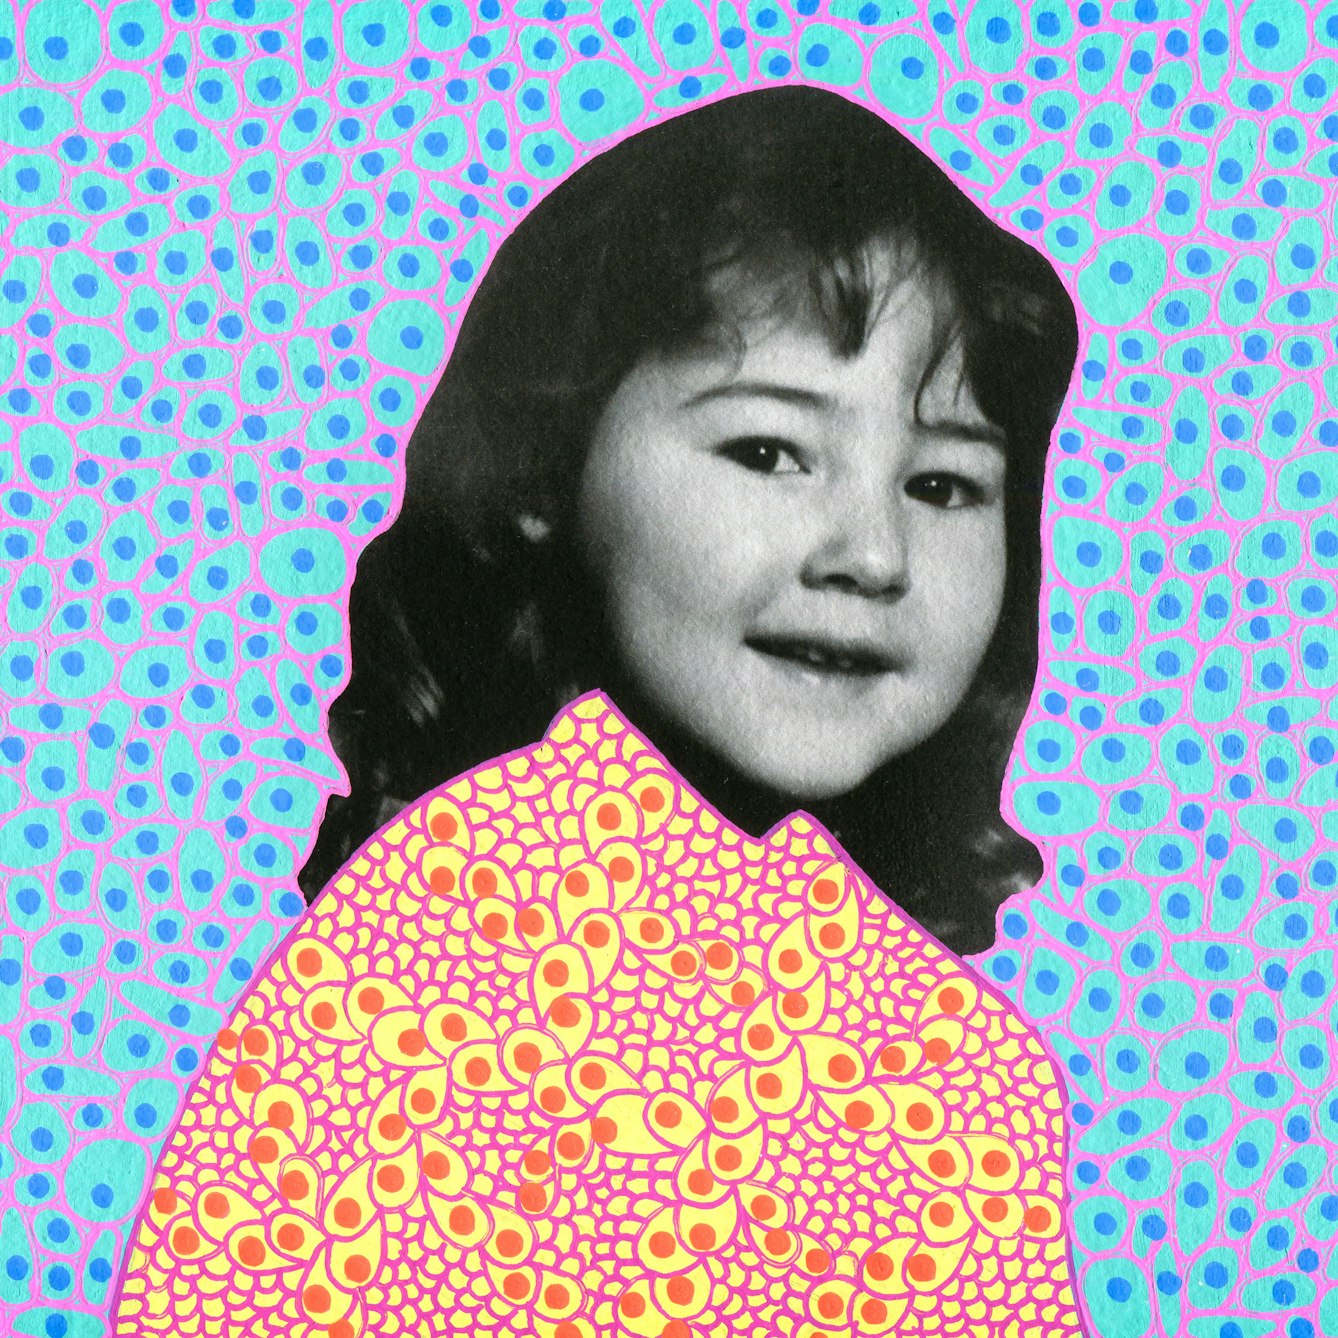 Artwork created by painting over the surface of a black and white photographic print with colourful paint. The artwork shows the original head of a young girl from the photograph beneath. The girl is pictured from the chest up and is smiling to the camera. Apart from her head and face, the rest of the image is a painted cyan background covered in small blue dots and purple lines forming cell like structures around the blue dots. The girl's clothes are painted differently, with a yellow background, covered in orange dots, surrounded by loops of purple lines, arranged almost like scales or feathers.